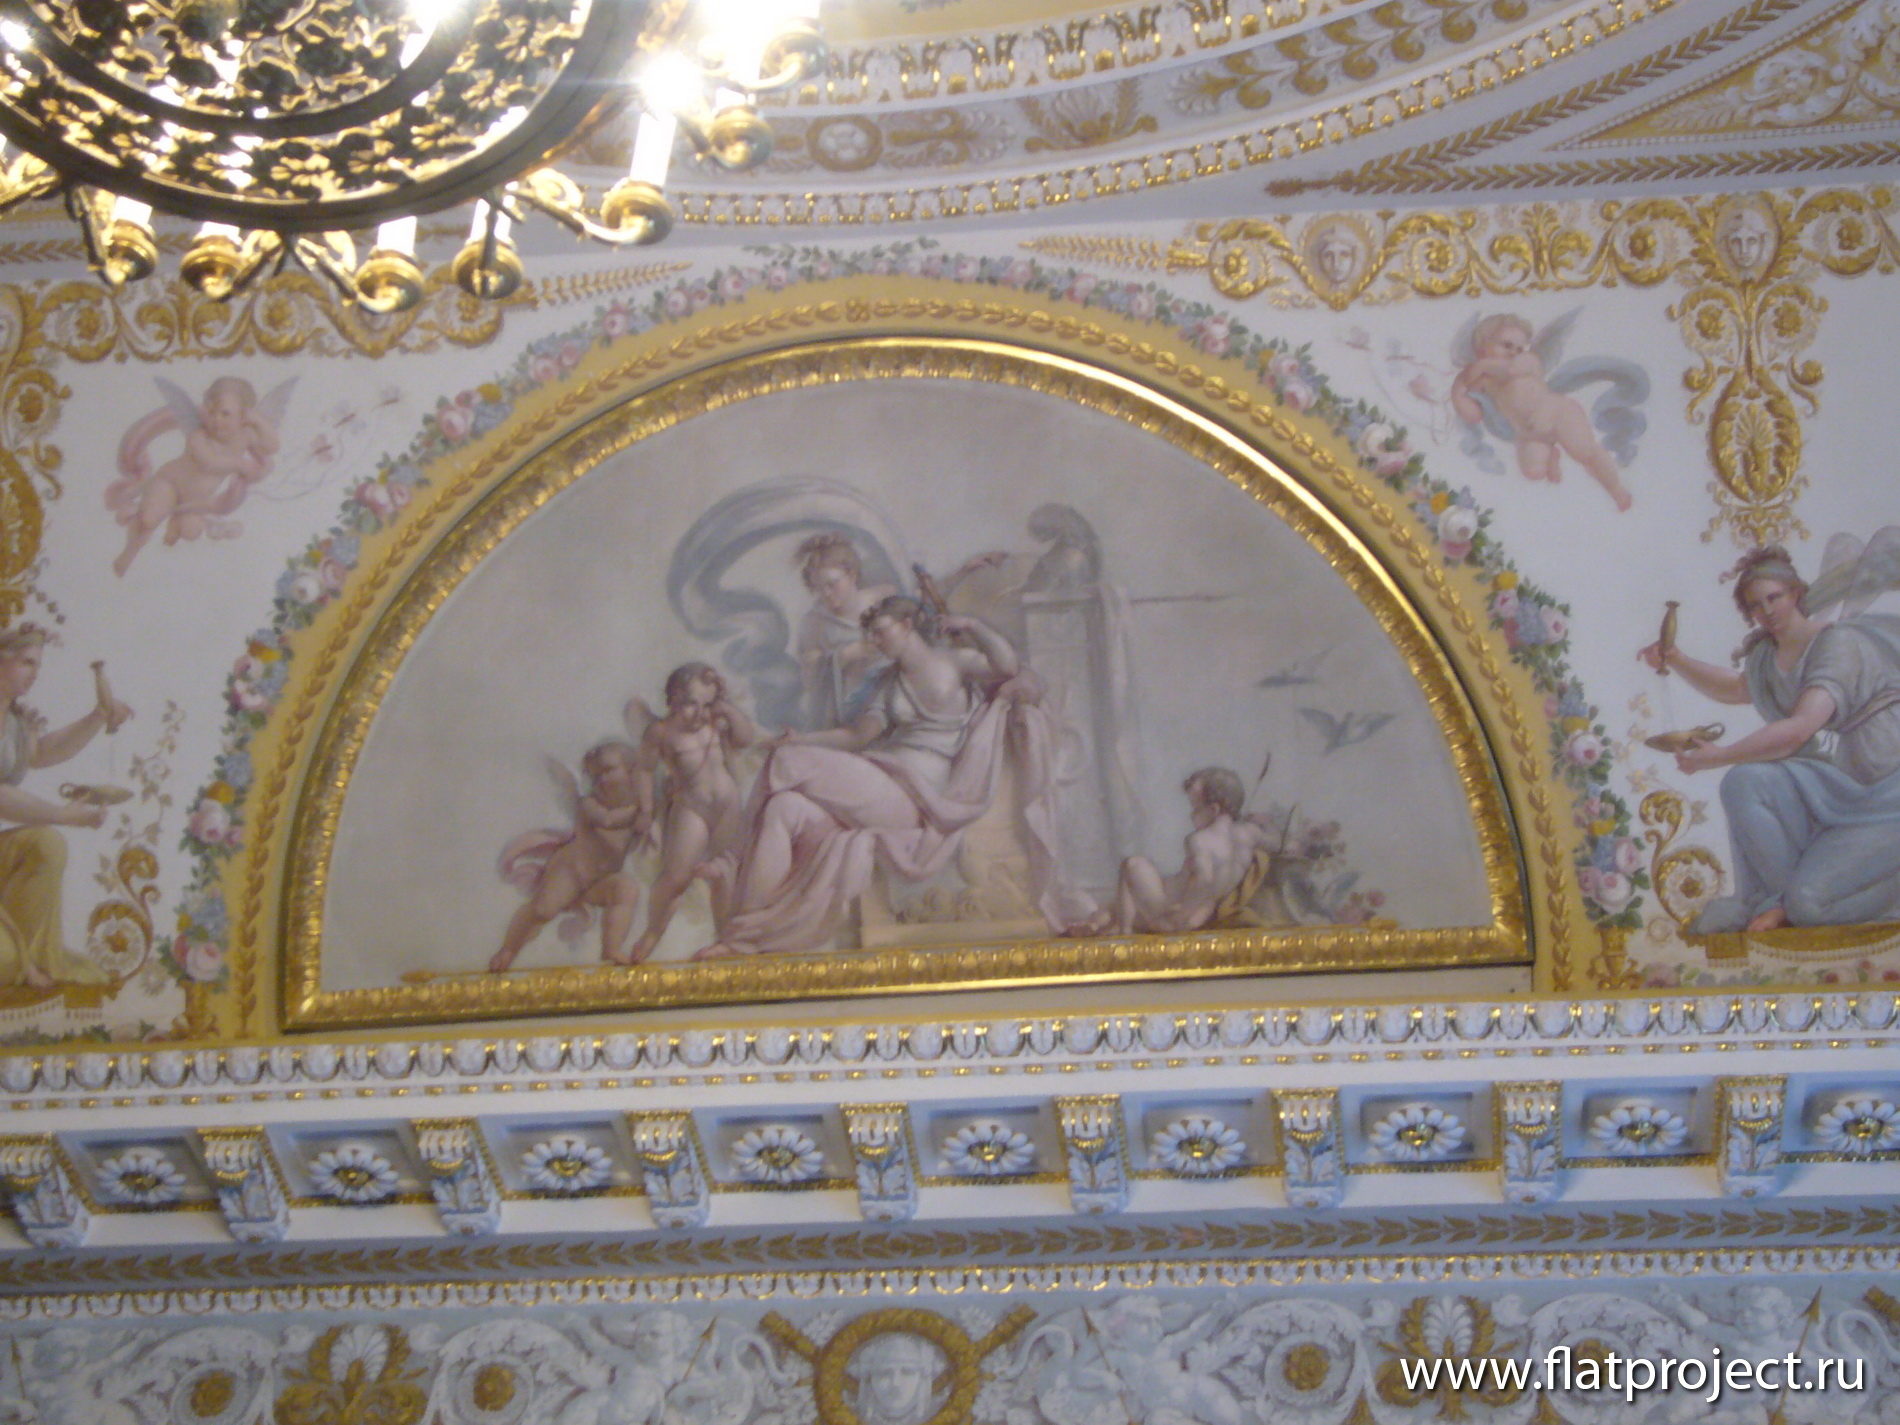 The State Russian museum interiors – photo 62